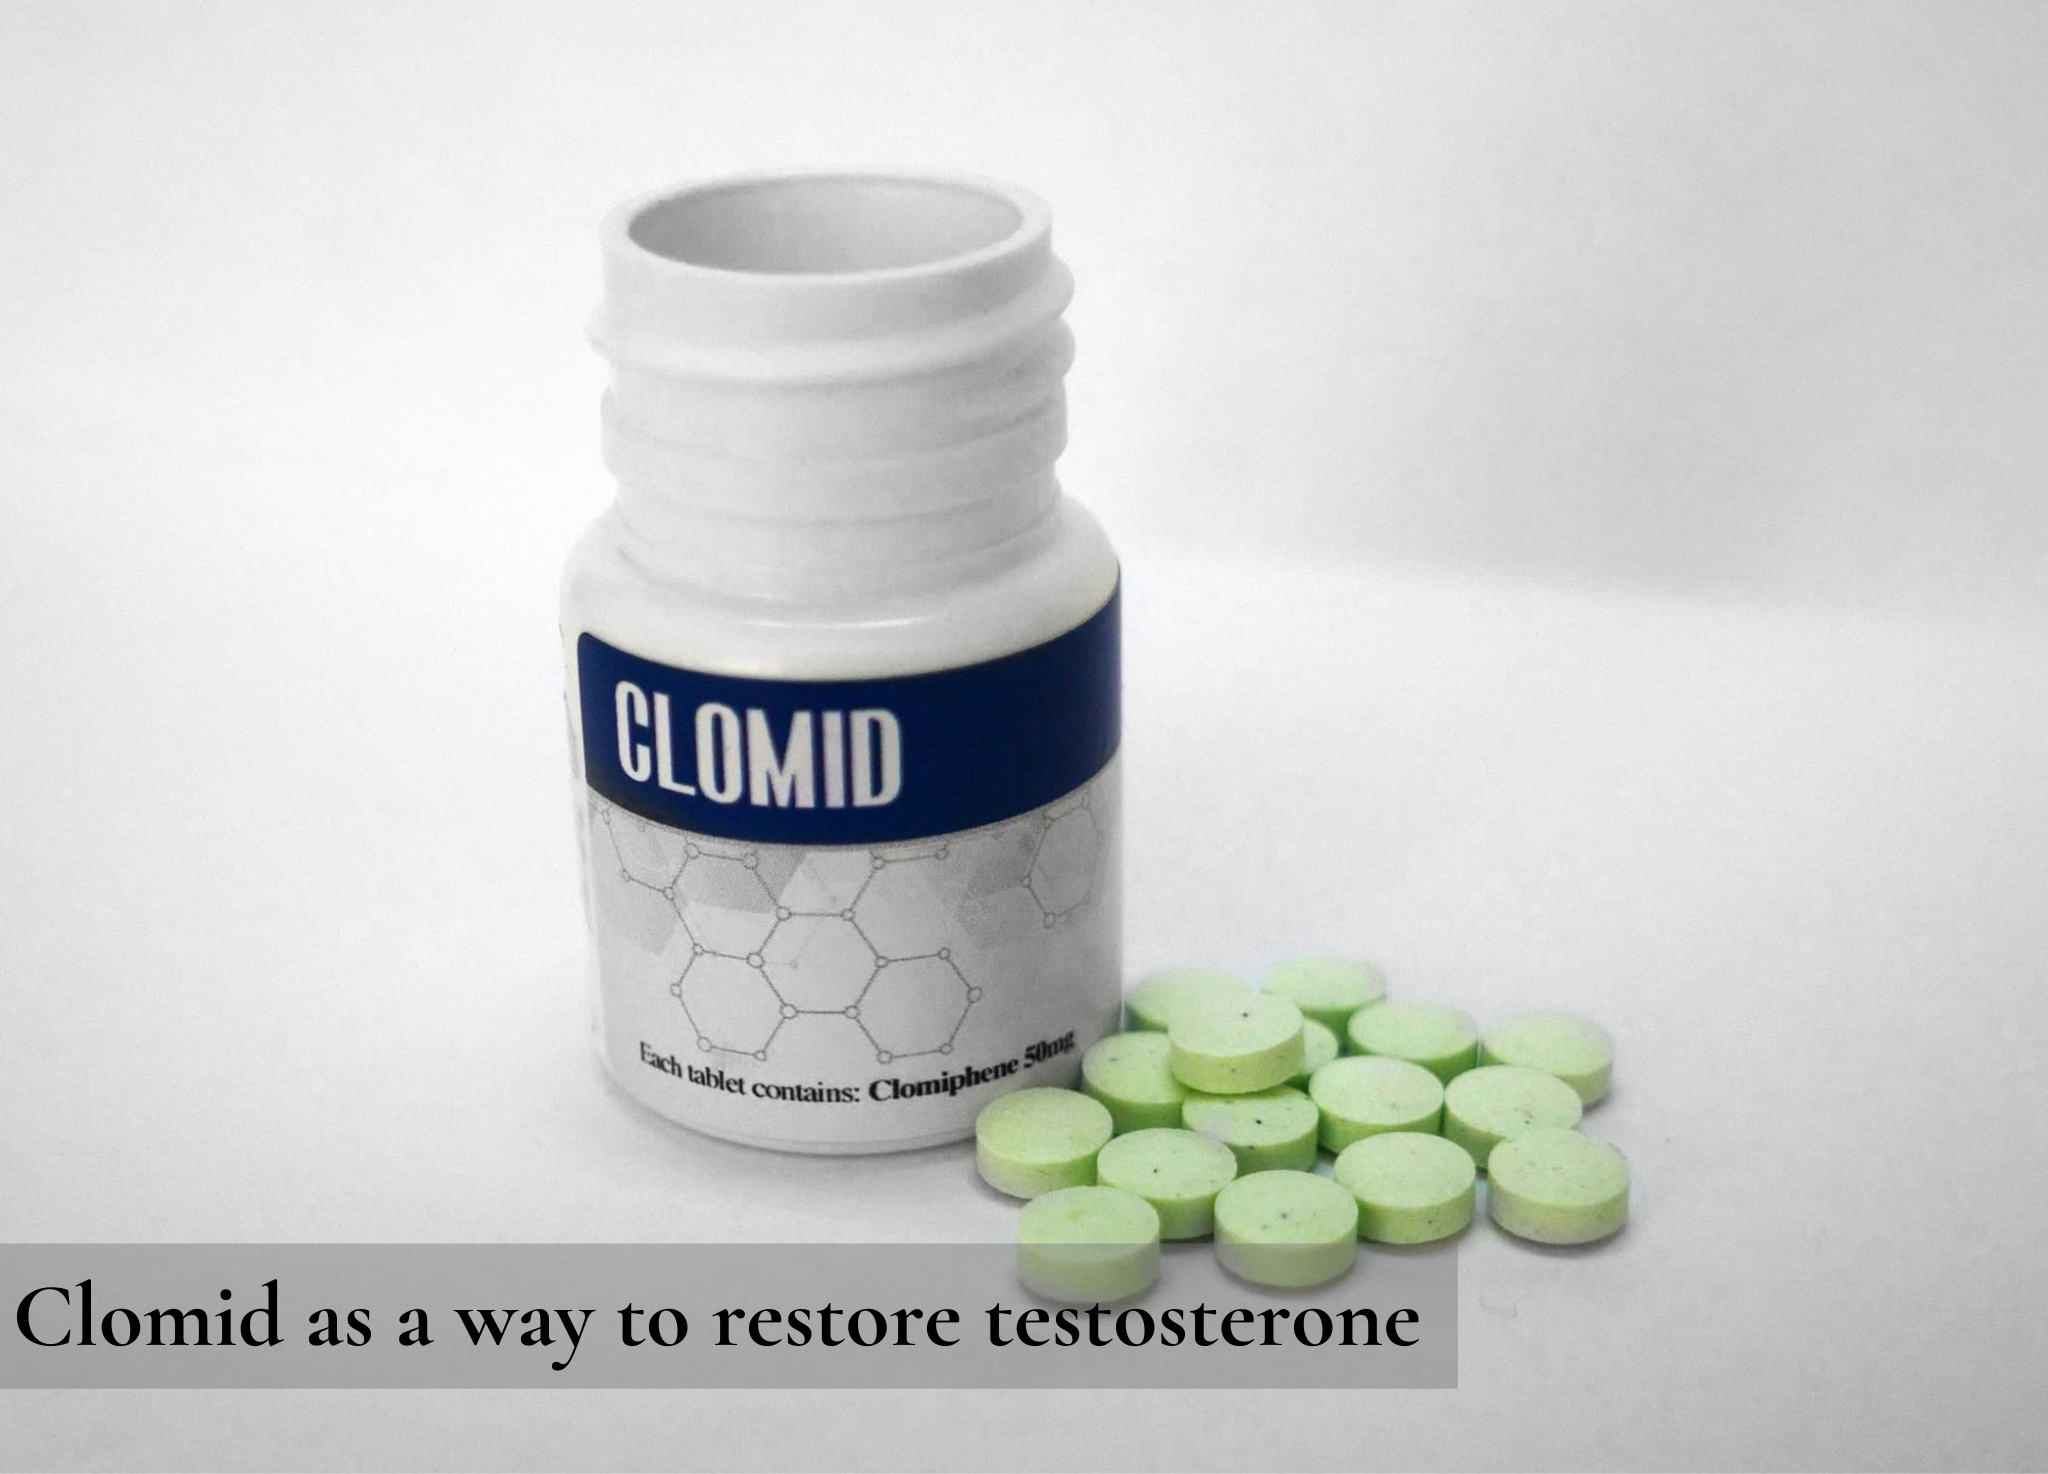 Clomid as a way to restore testosterone